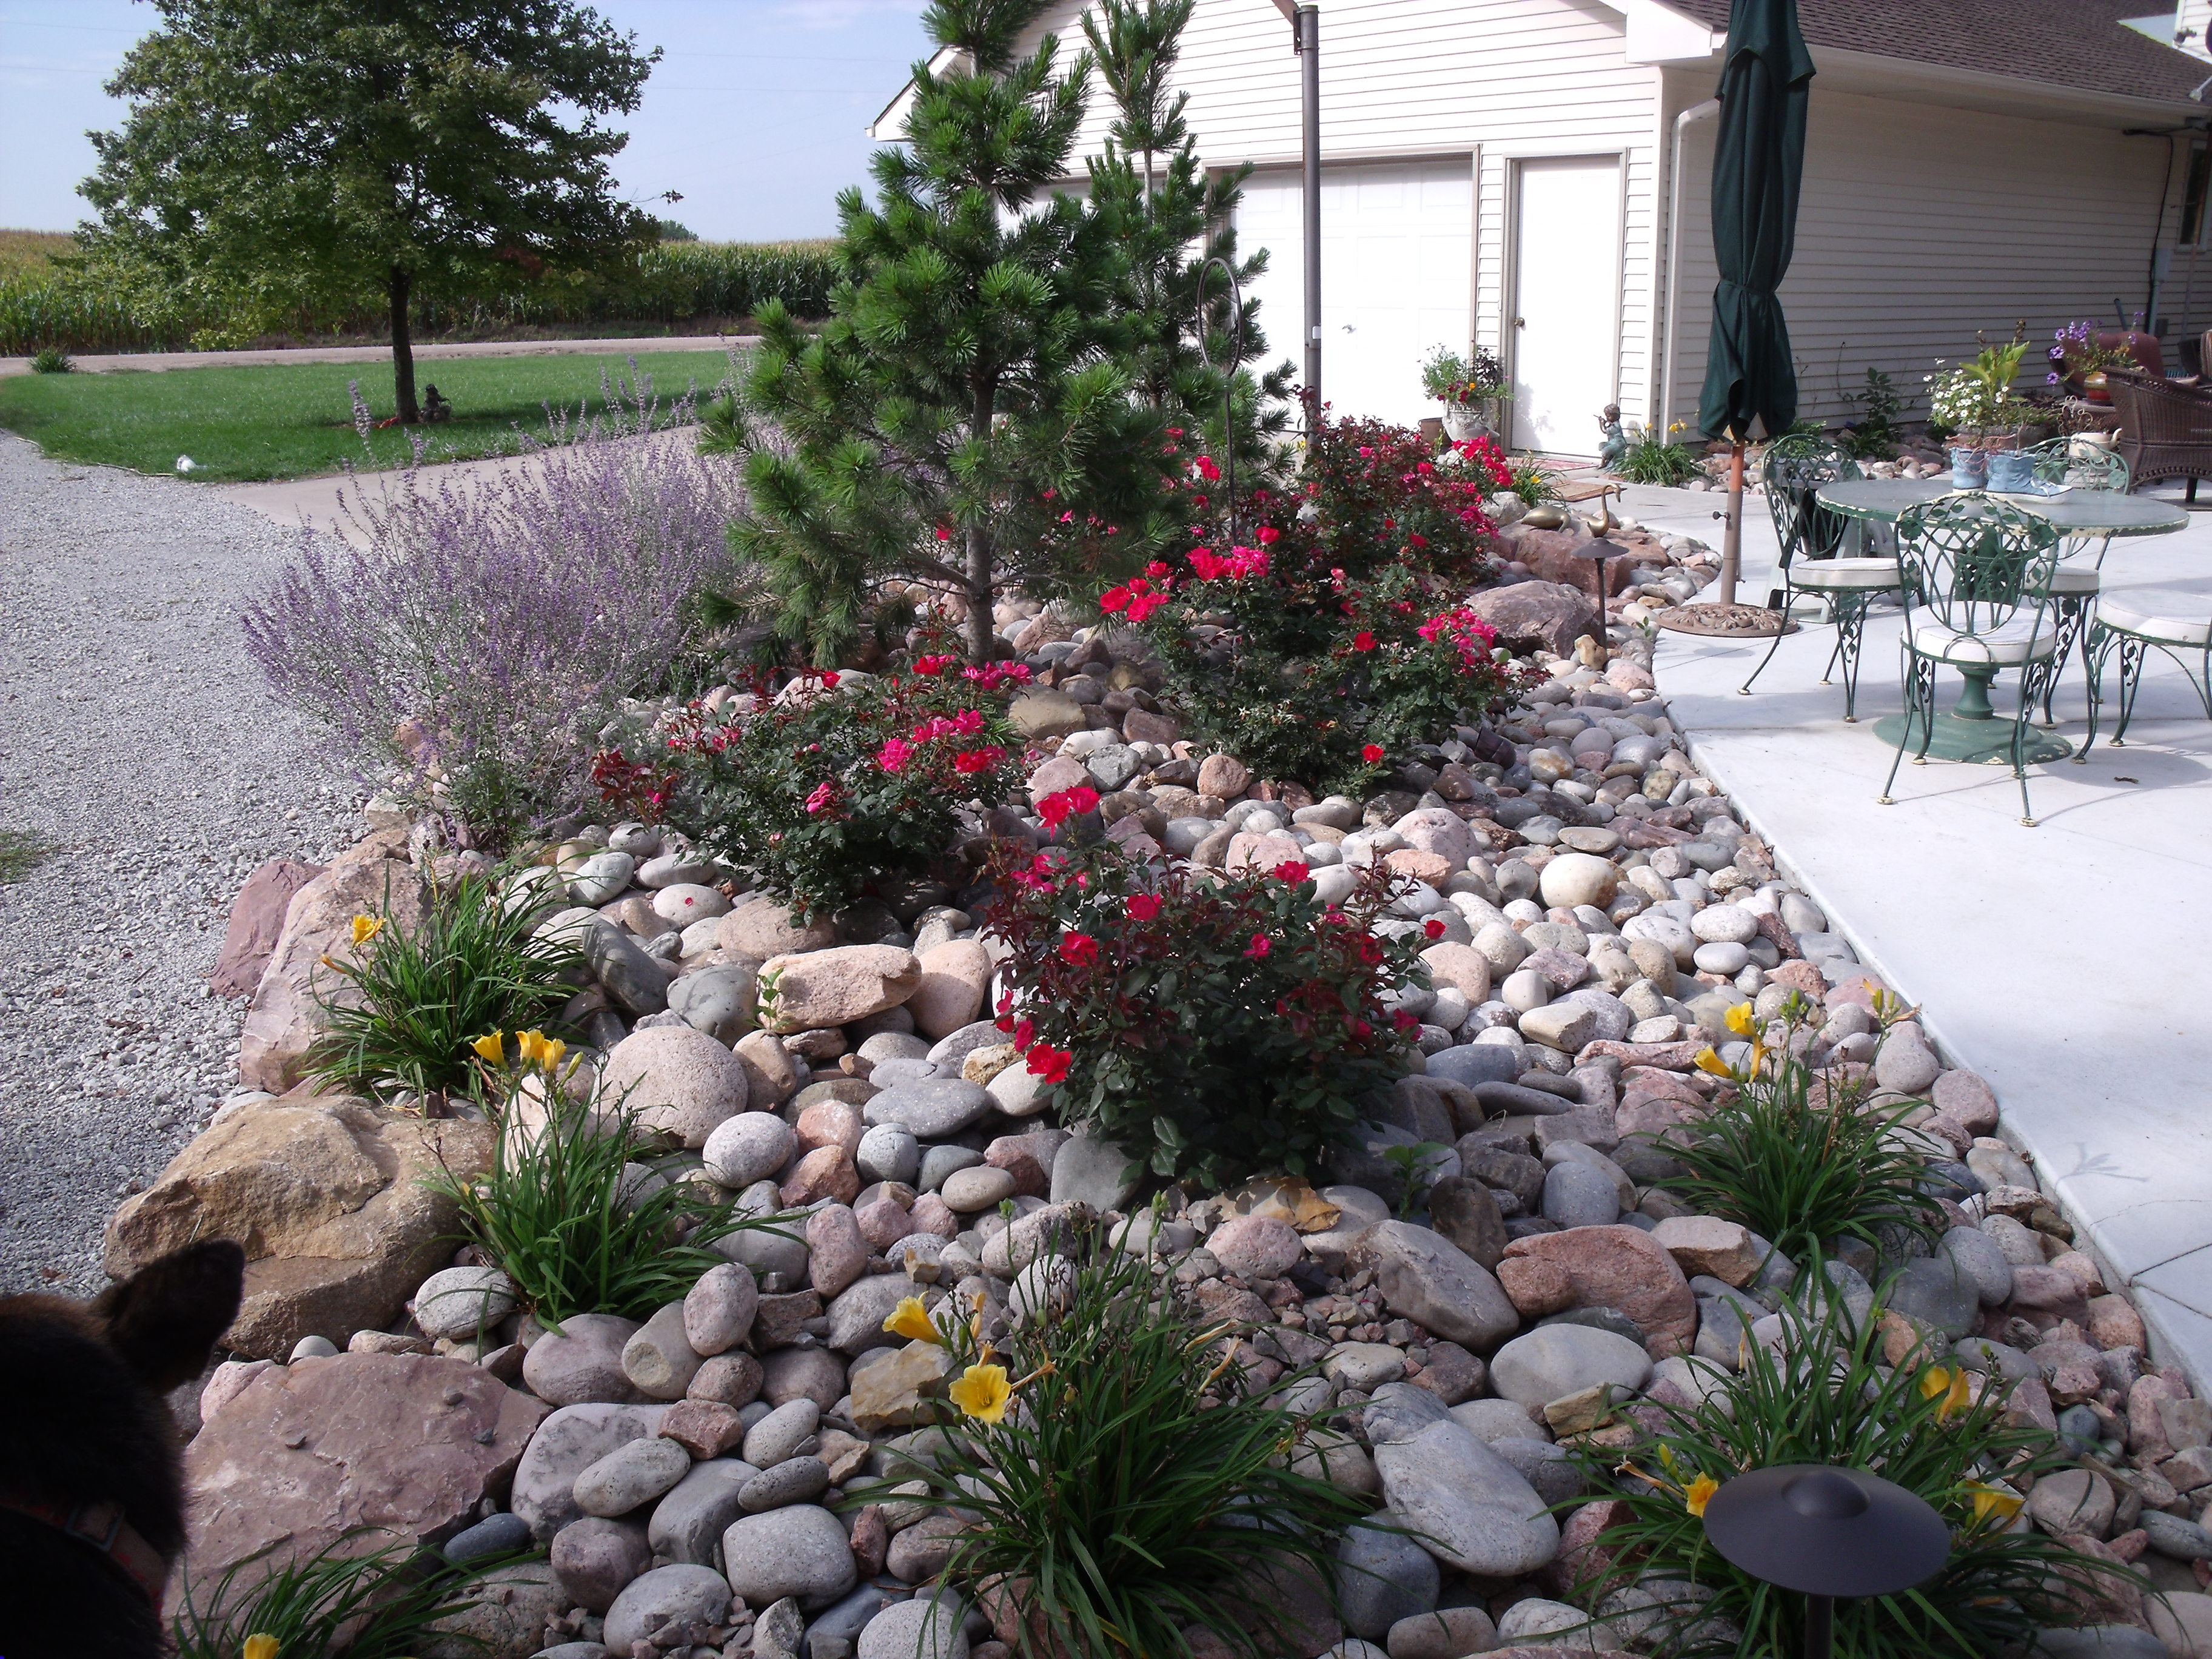 Landscape Rocks And Stones For Sale : MANITOBA Design - How To Use ...